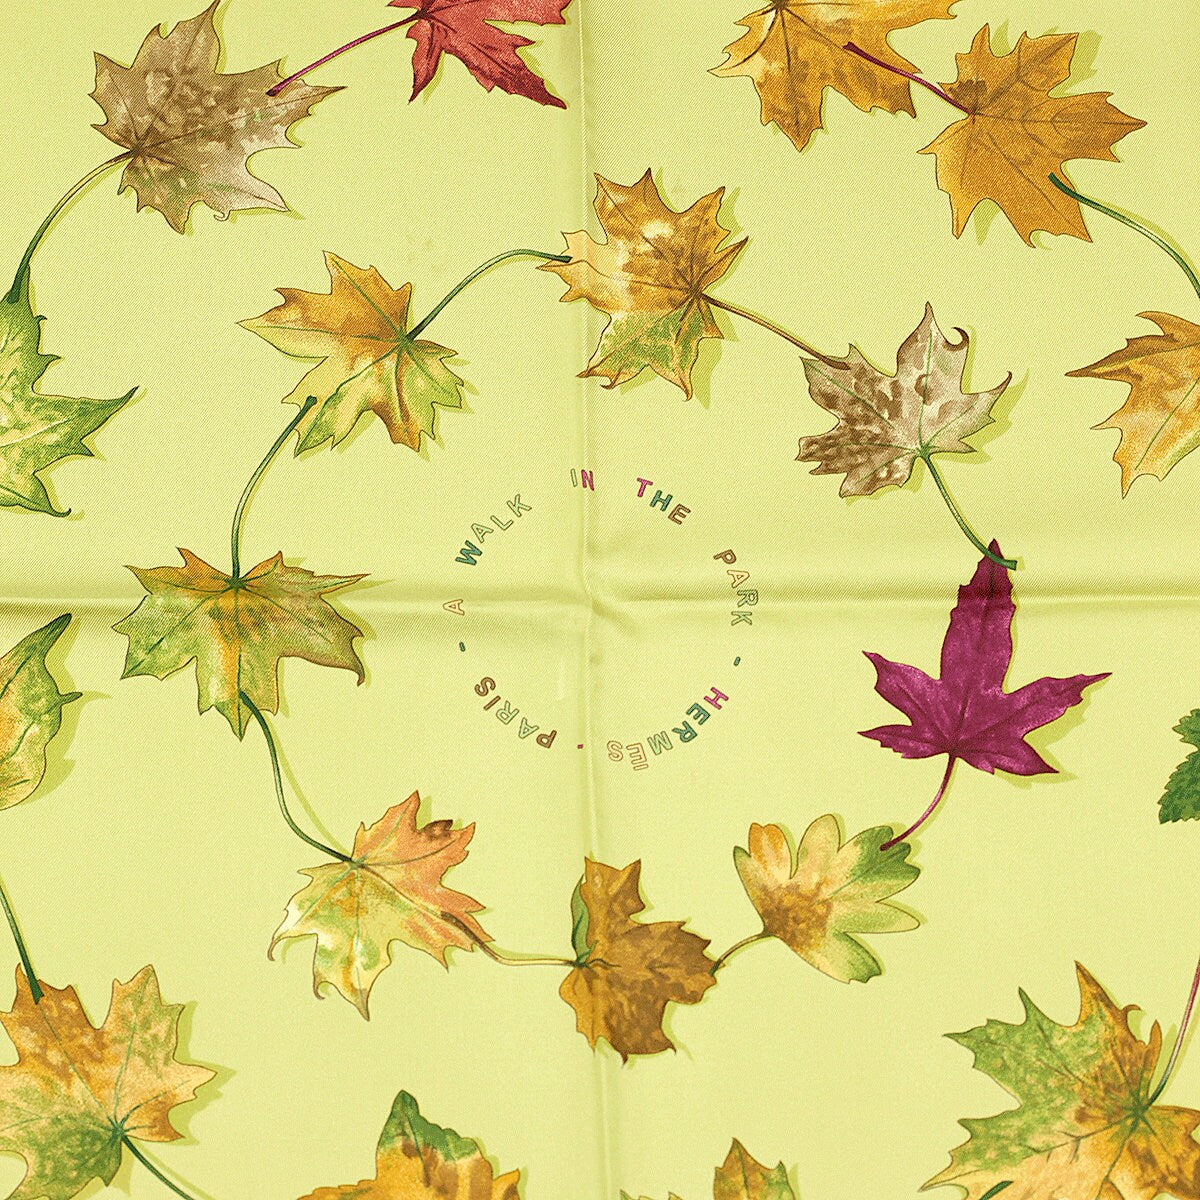 Hermes Scarf "Walk in the Park" by Leigh P. Cook 90cm Silk | Carre Foulard